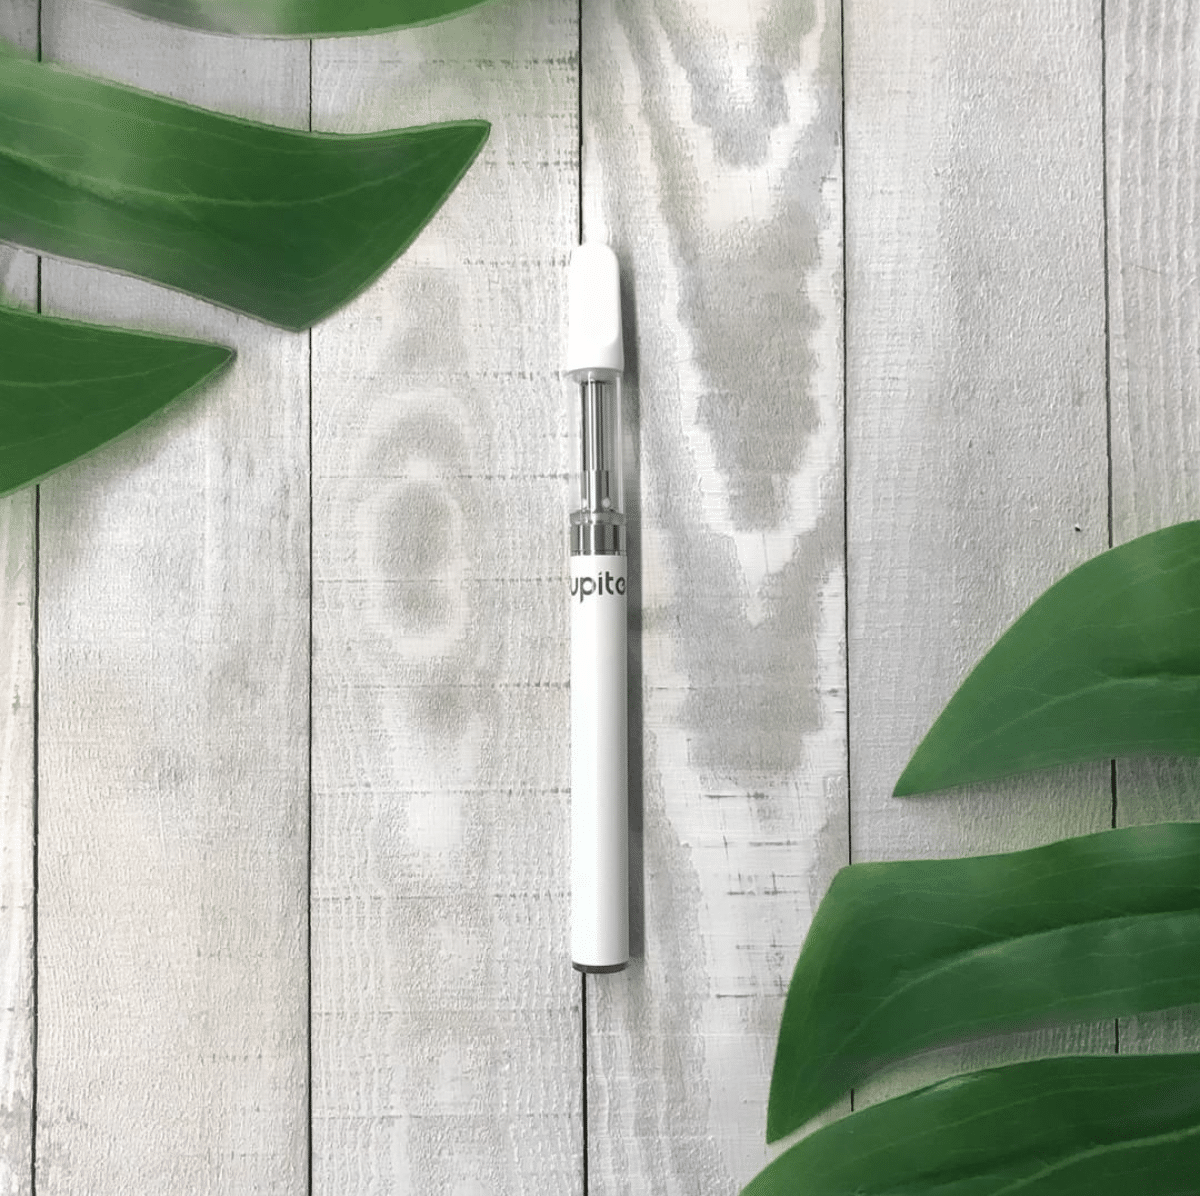 Jupiter CCELL® Liquid6 Standard Vaporizer Laying on White Wood Table with Tropical Leaves